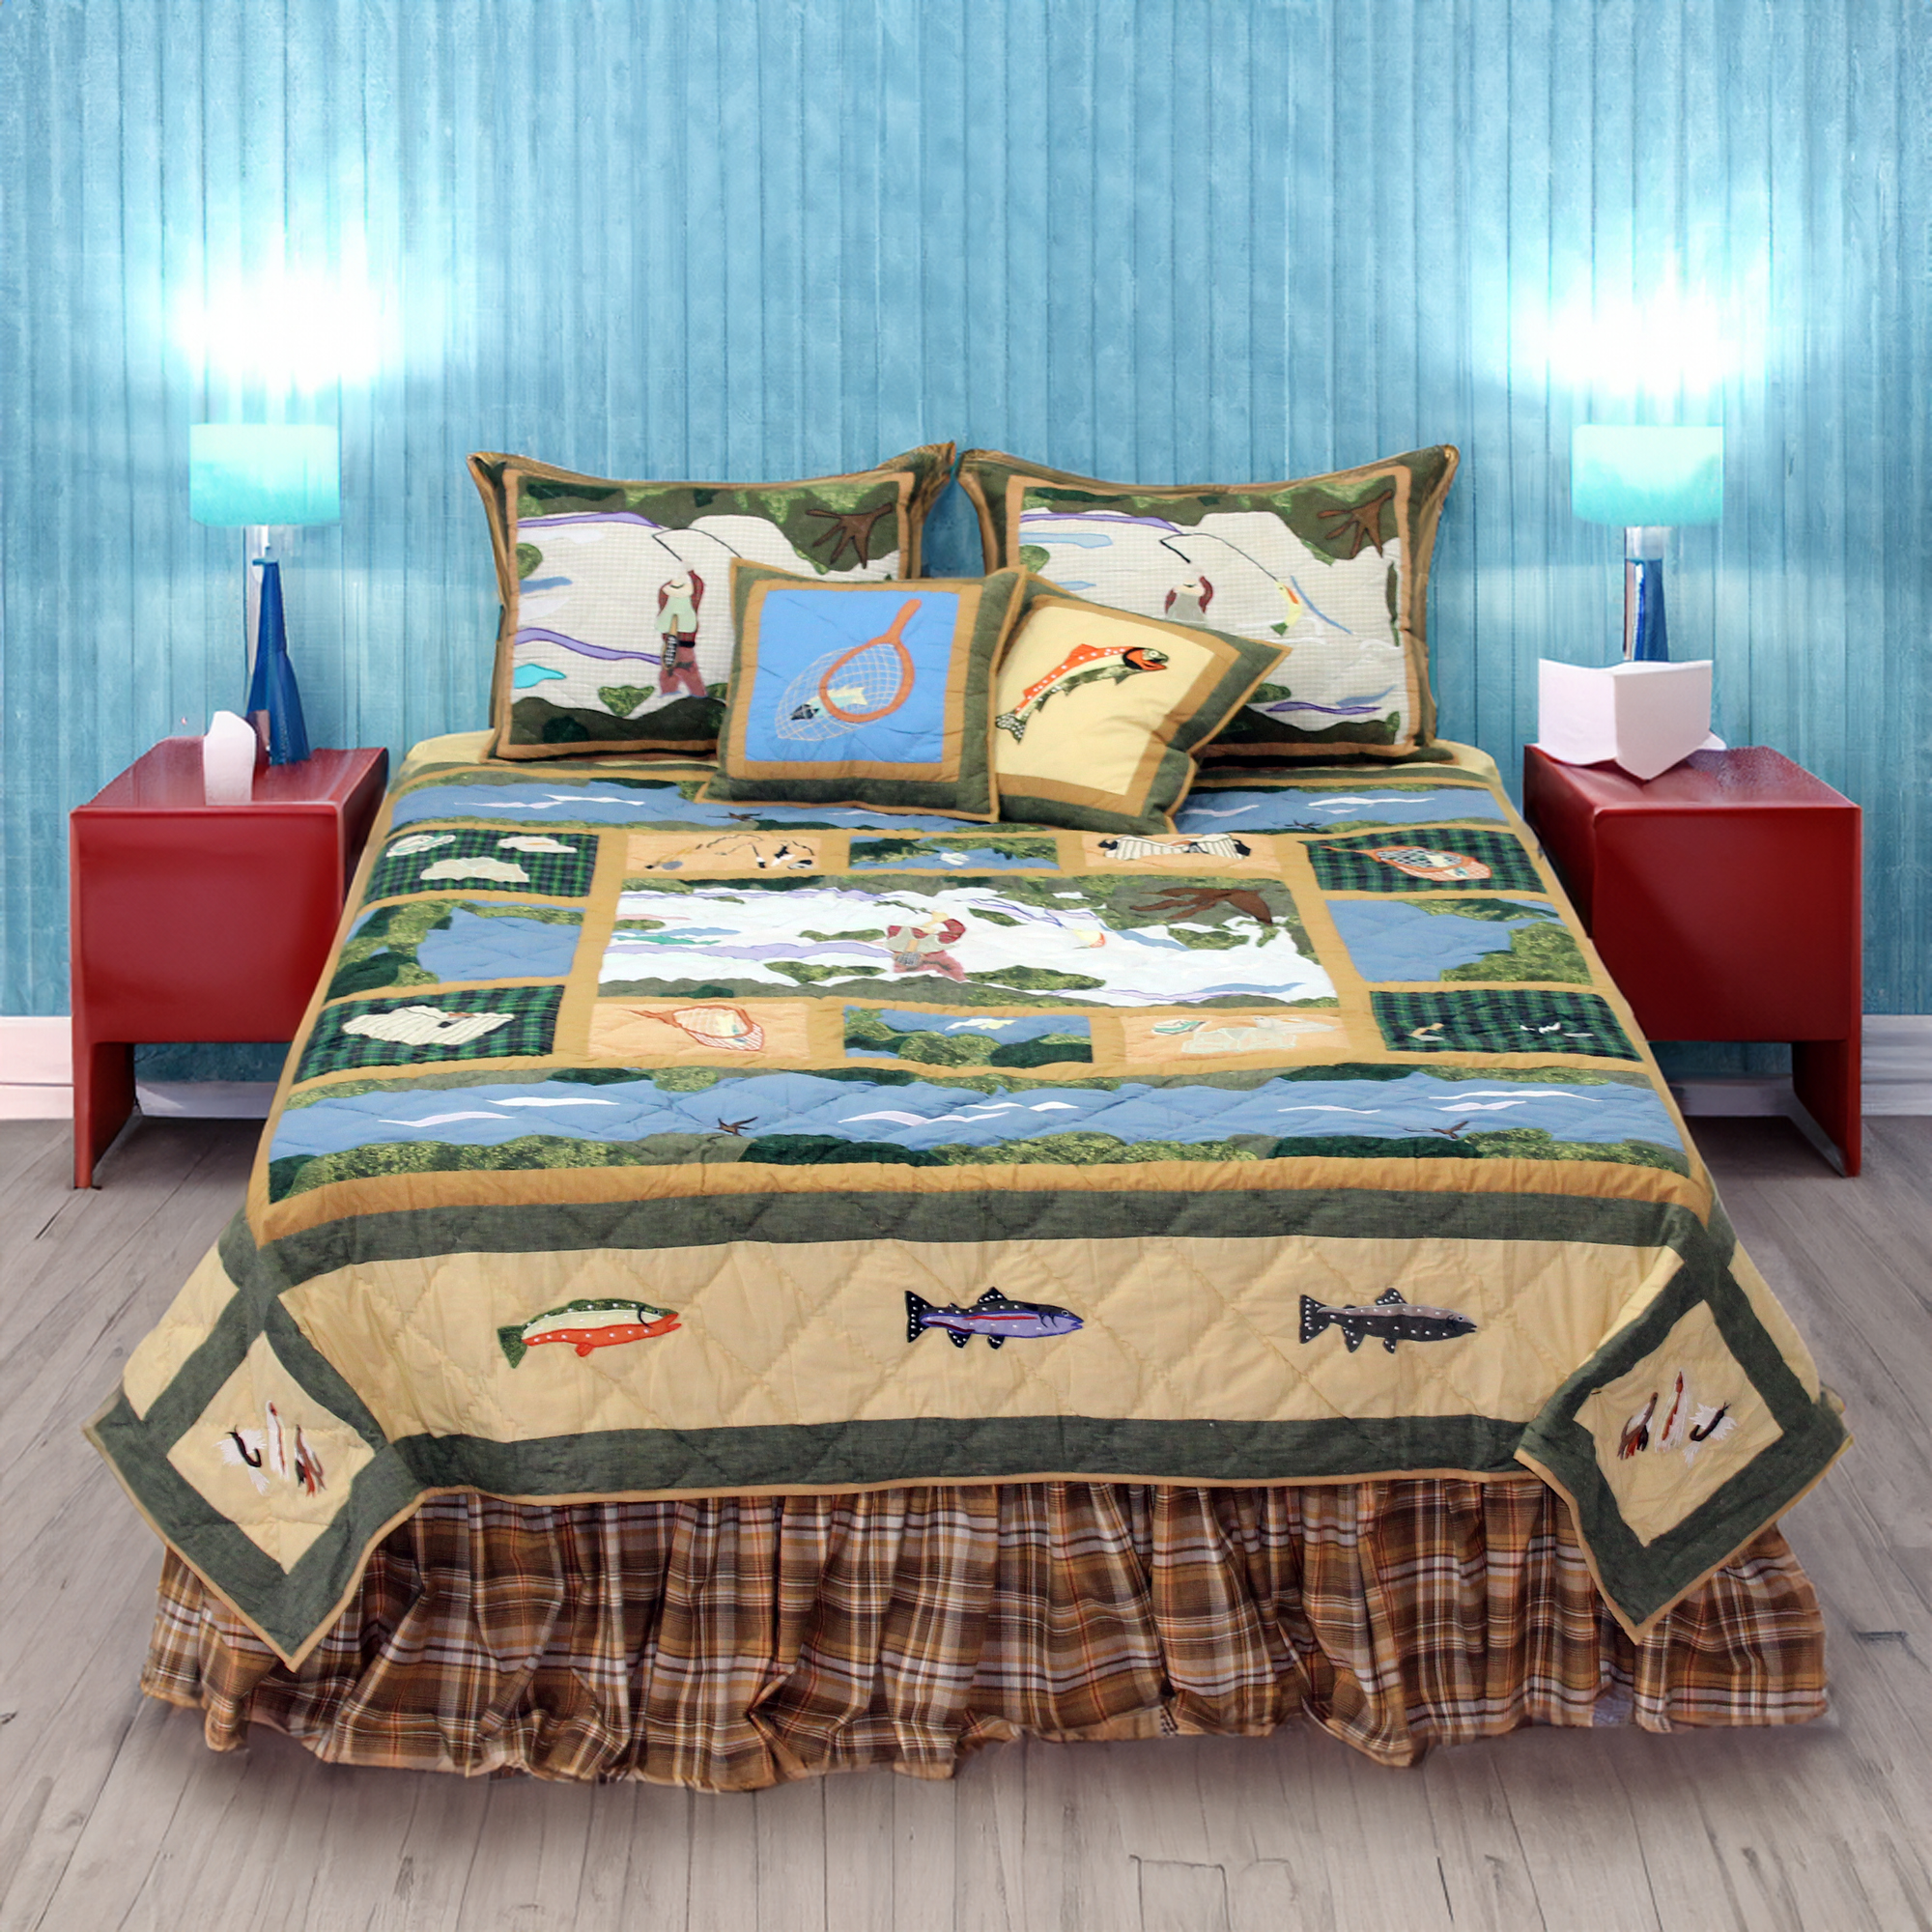 Fly Fishing Queen Quilt 85"W x 95"L